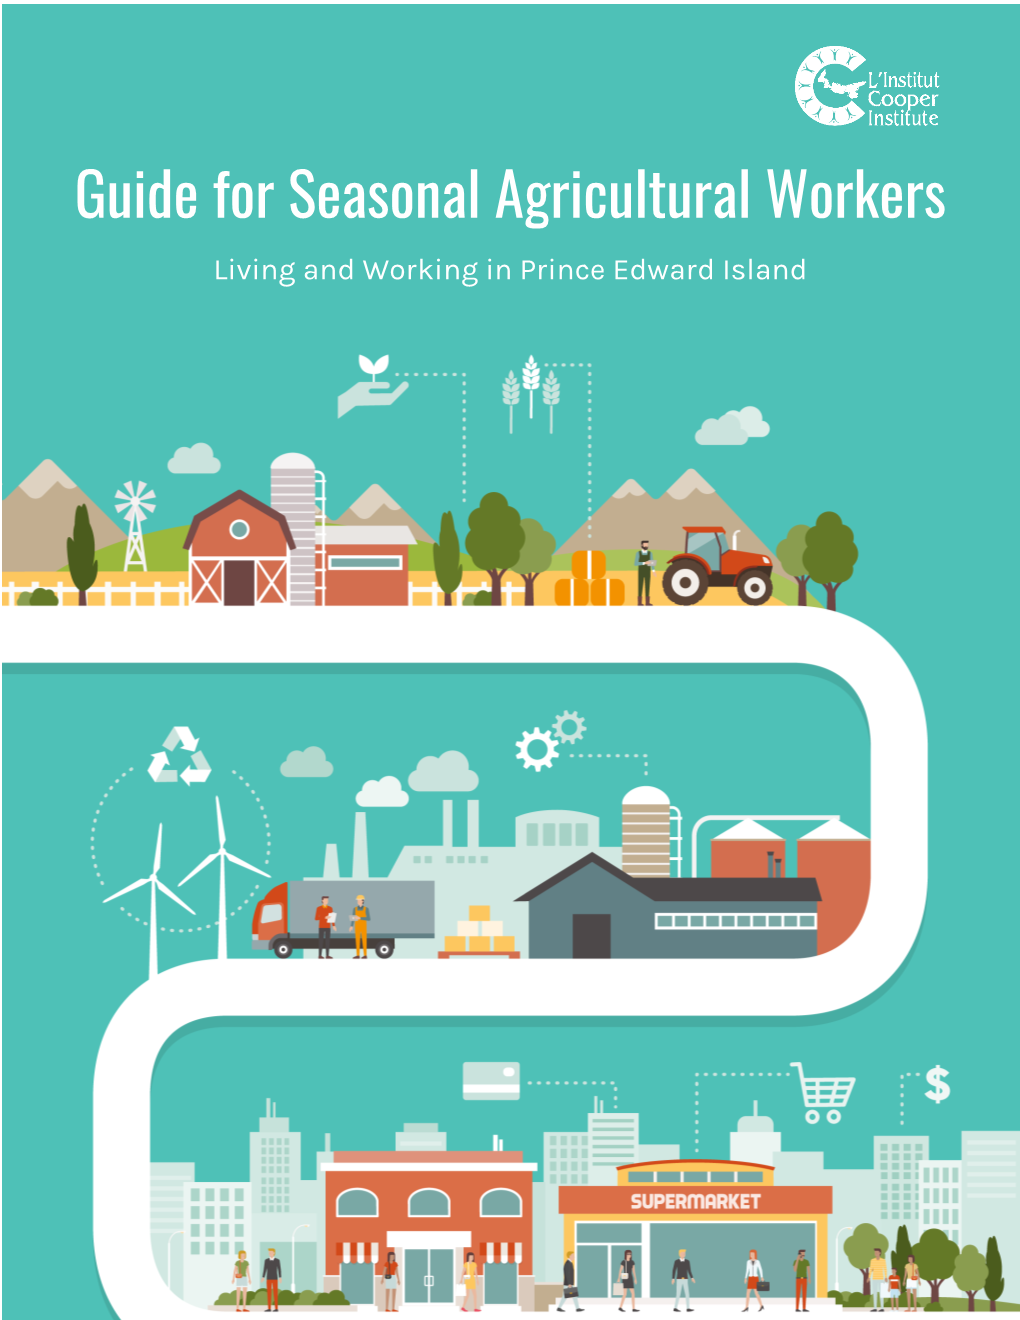 Guide for Seasonal Agricultural Workers Living and Working in Prince Edward Island